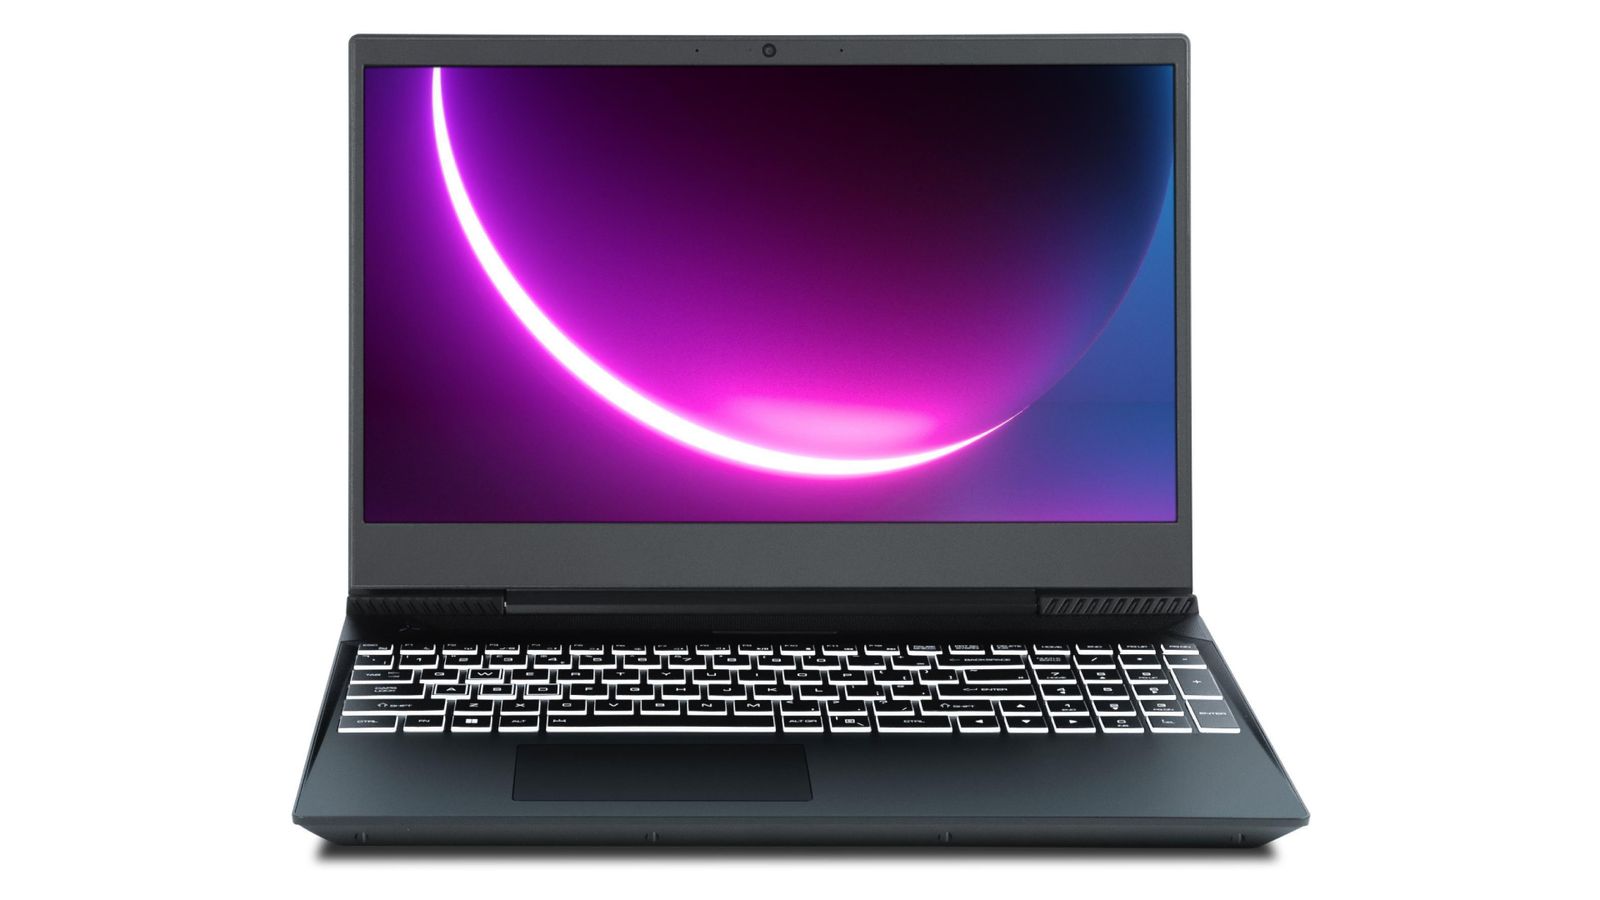 Best Final Fantasy XVI gaming laptop - Chillblast Apollo product image of a dark grey laptop featuring white backlit keys and a pink circular light on the display.